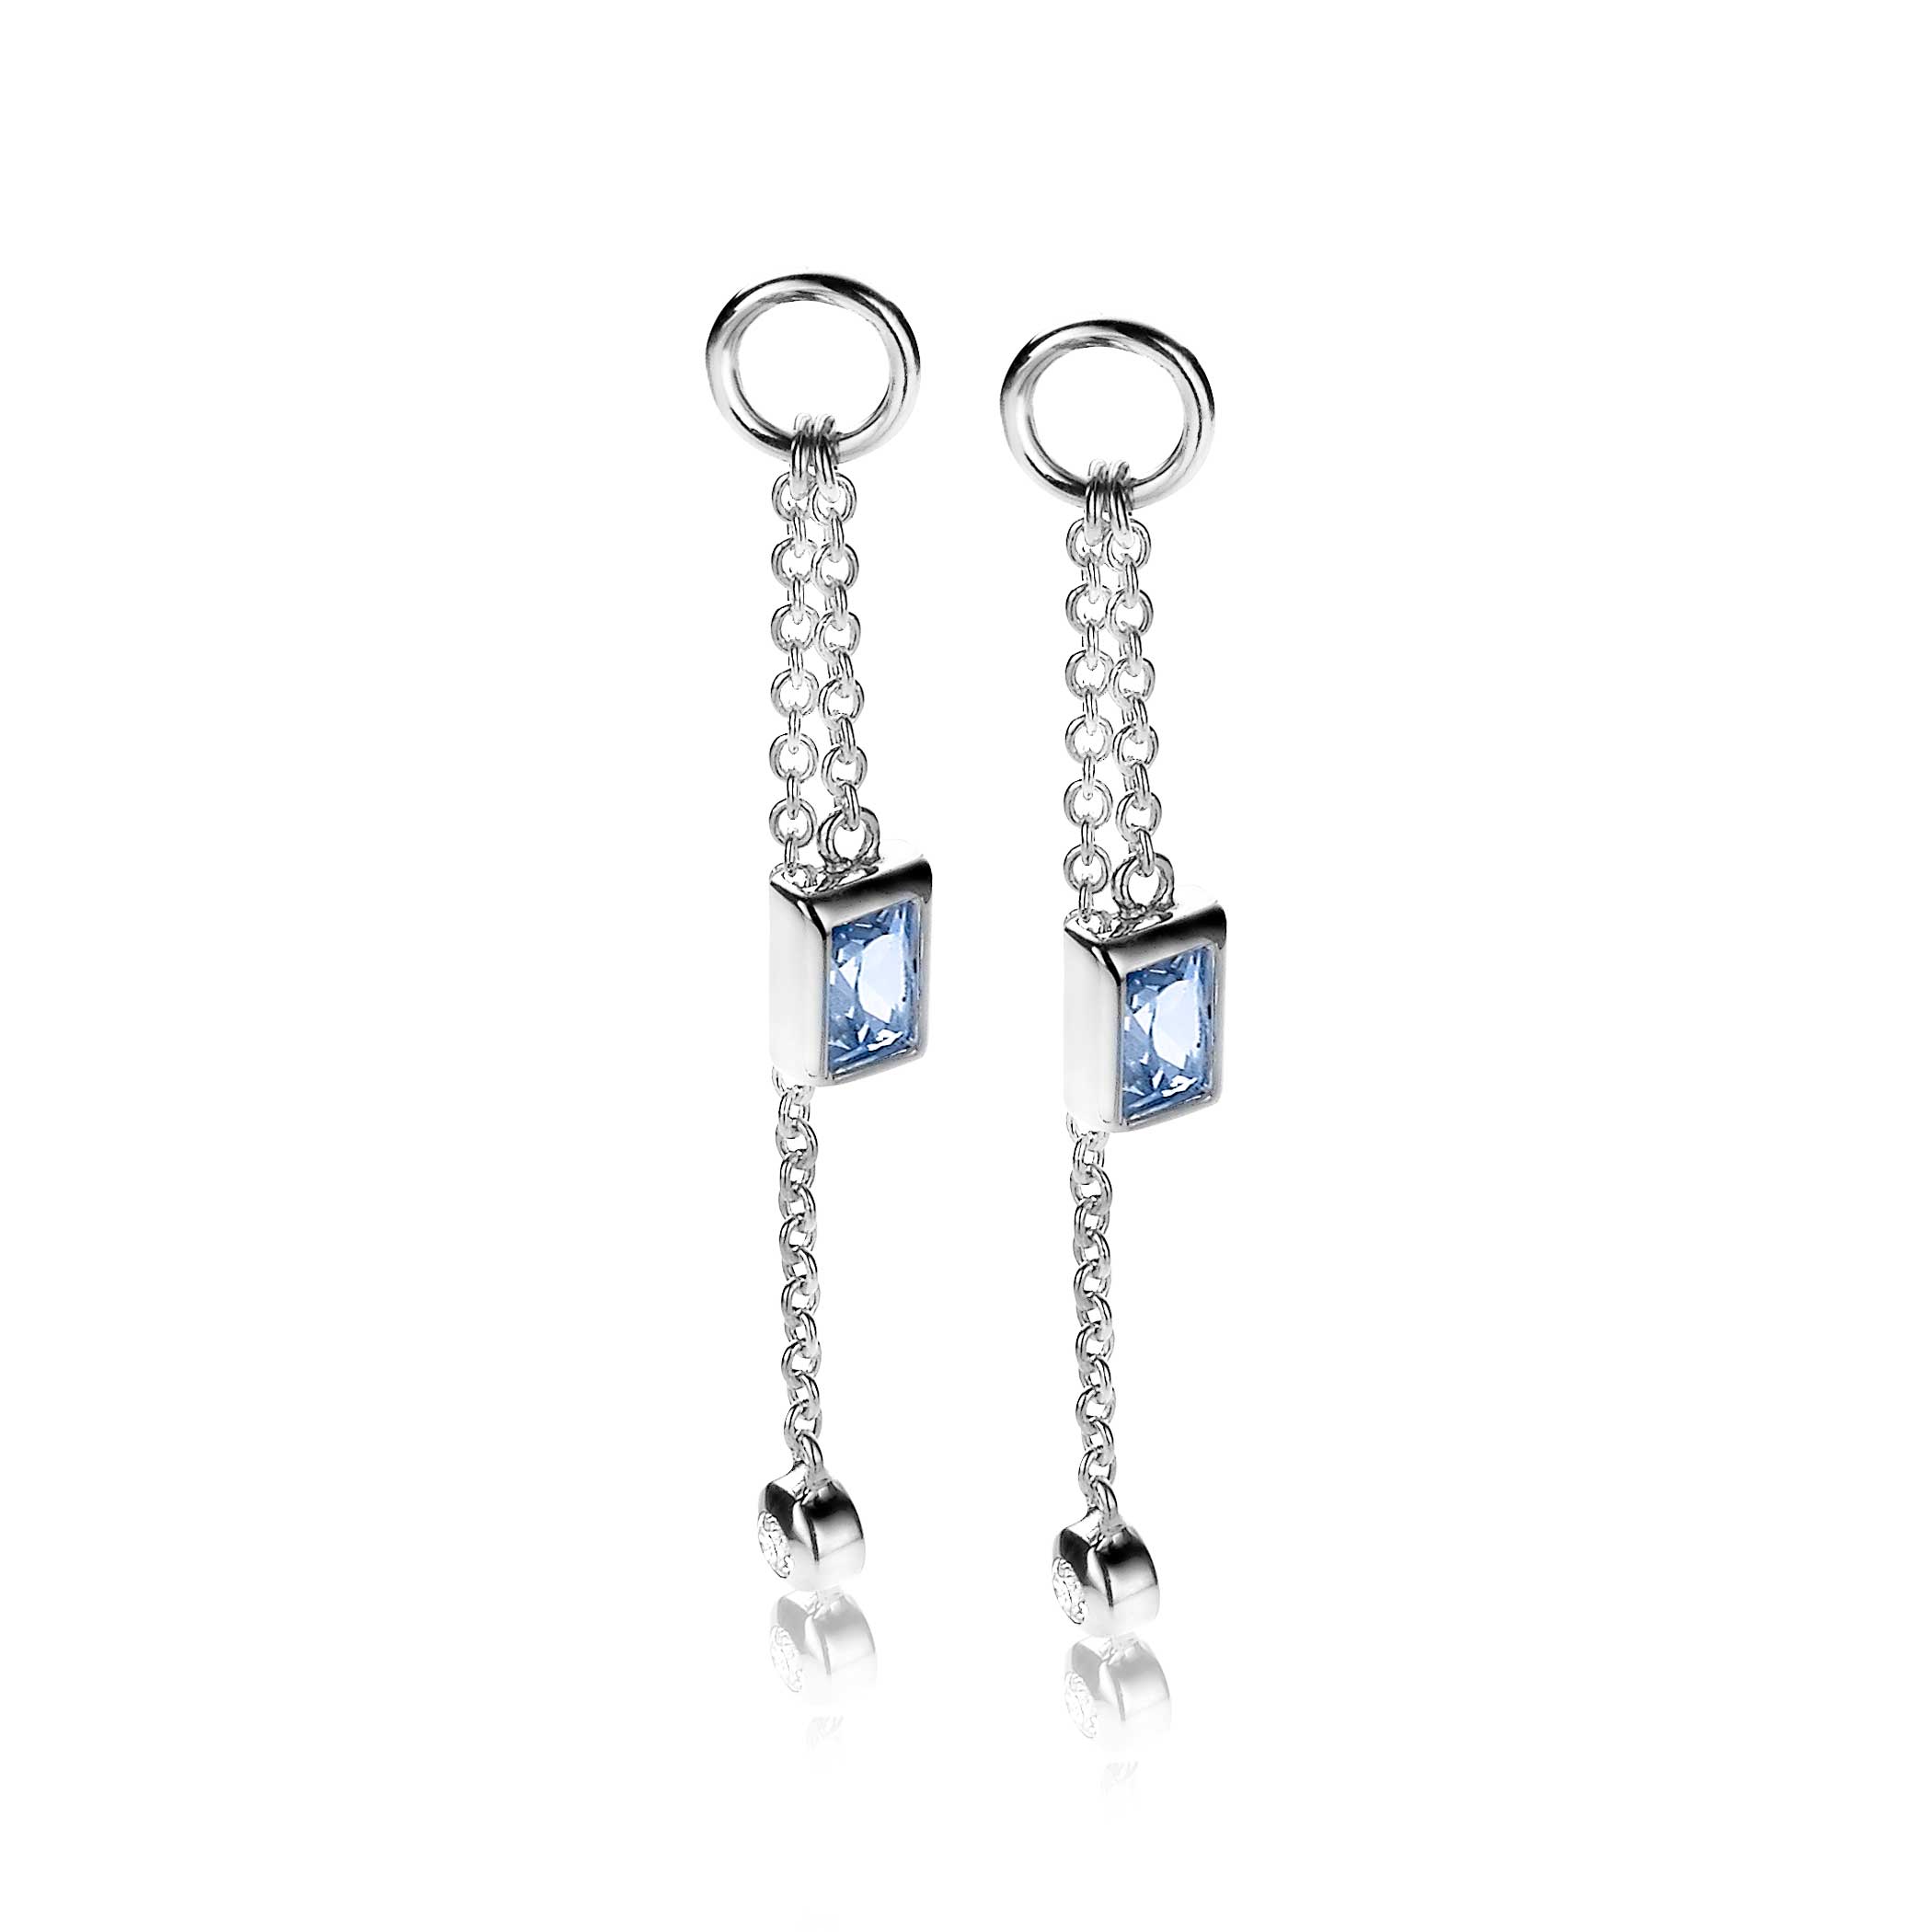 38mm ZINZI Sterling Silver Earrings Pendants Small Chain with Blue and White Zirconias ZICH2022B (excl. hoop earrings)